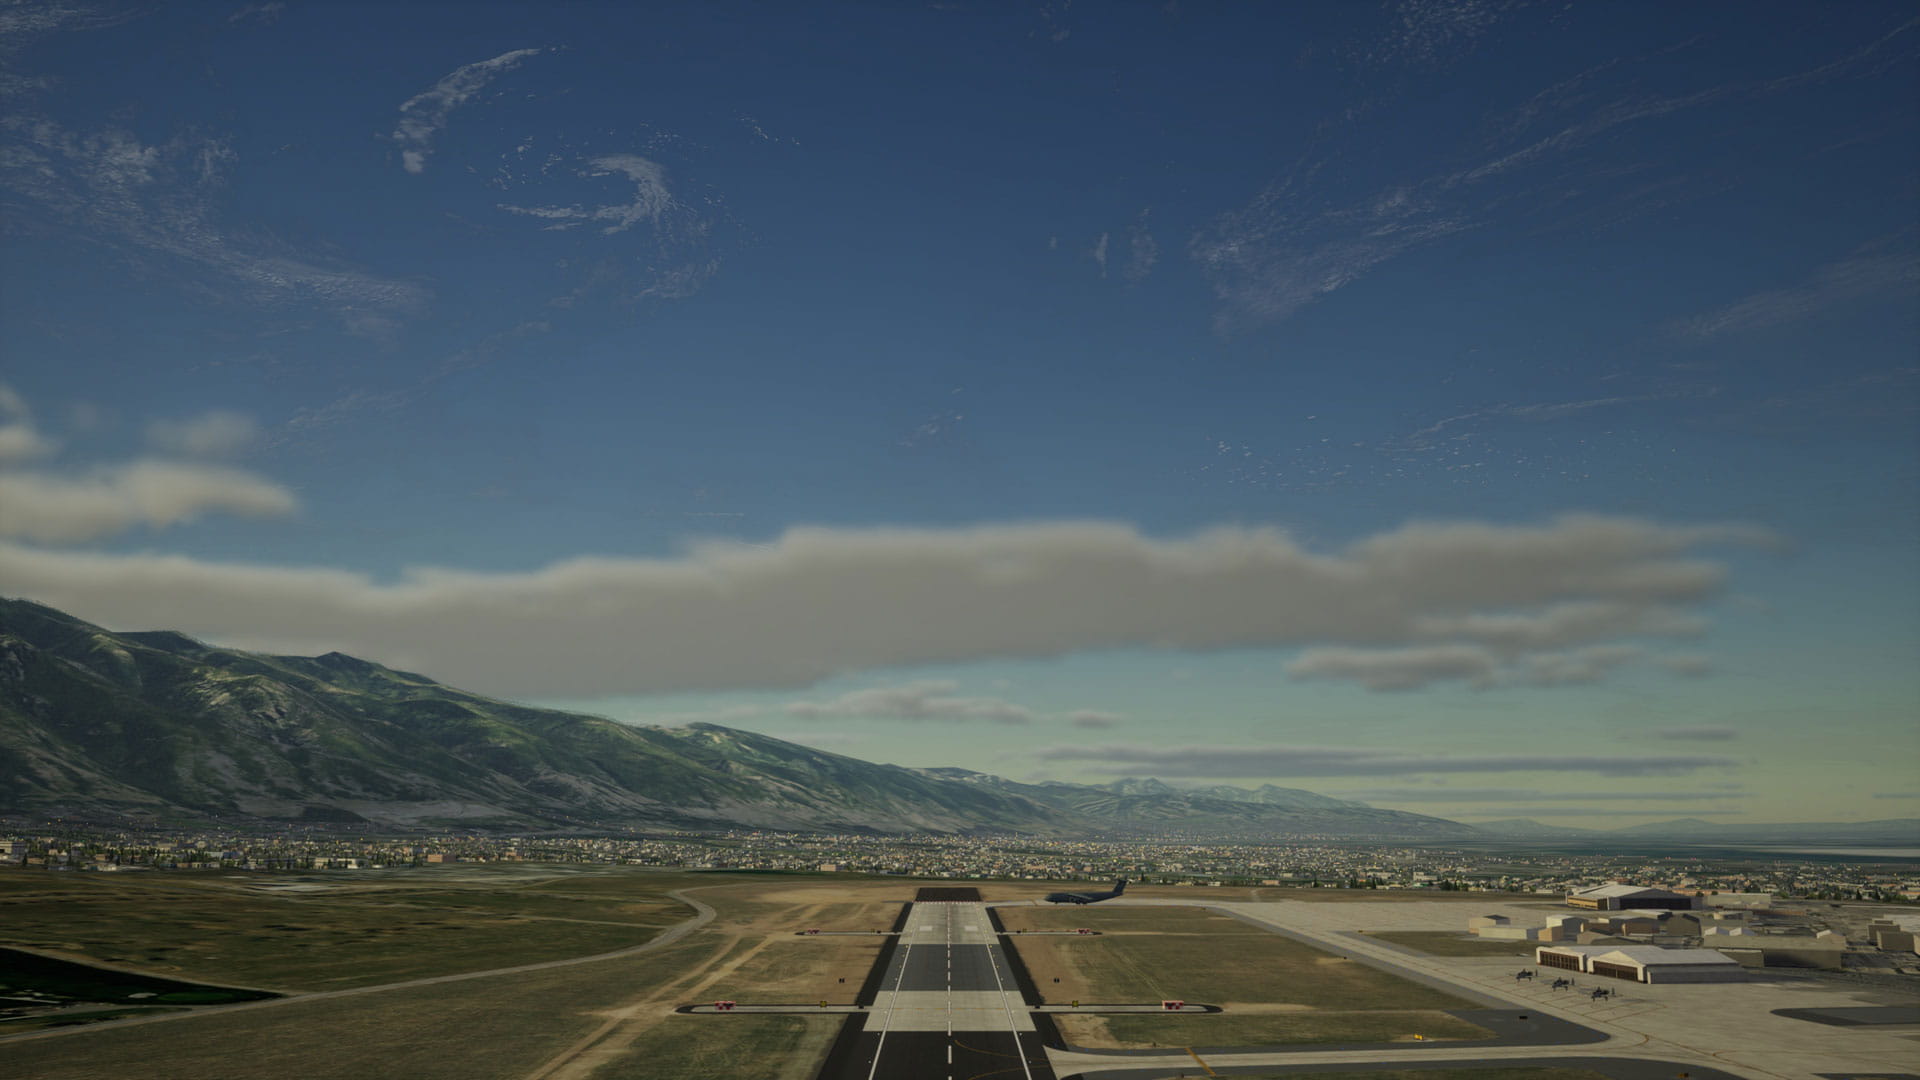 Computer-simulated image looking out the window of an aircraft at takeoff